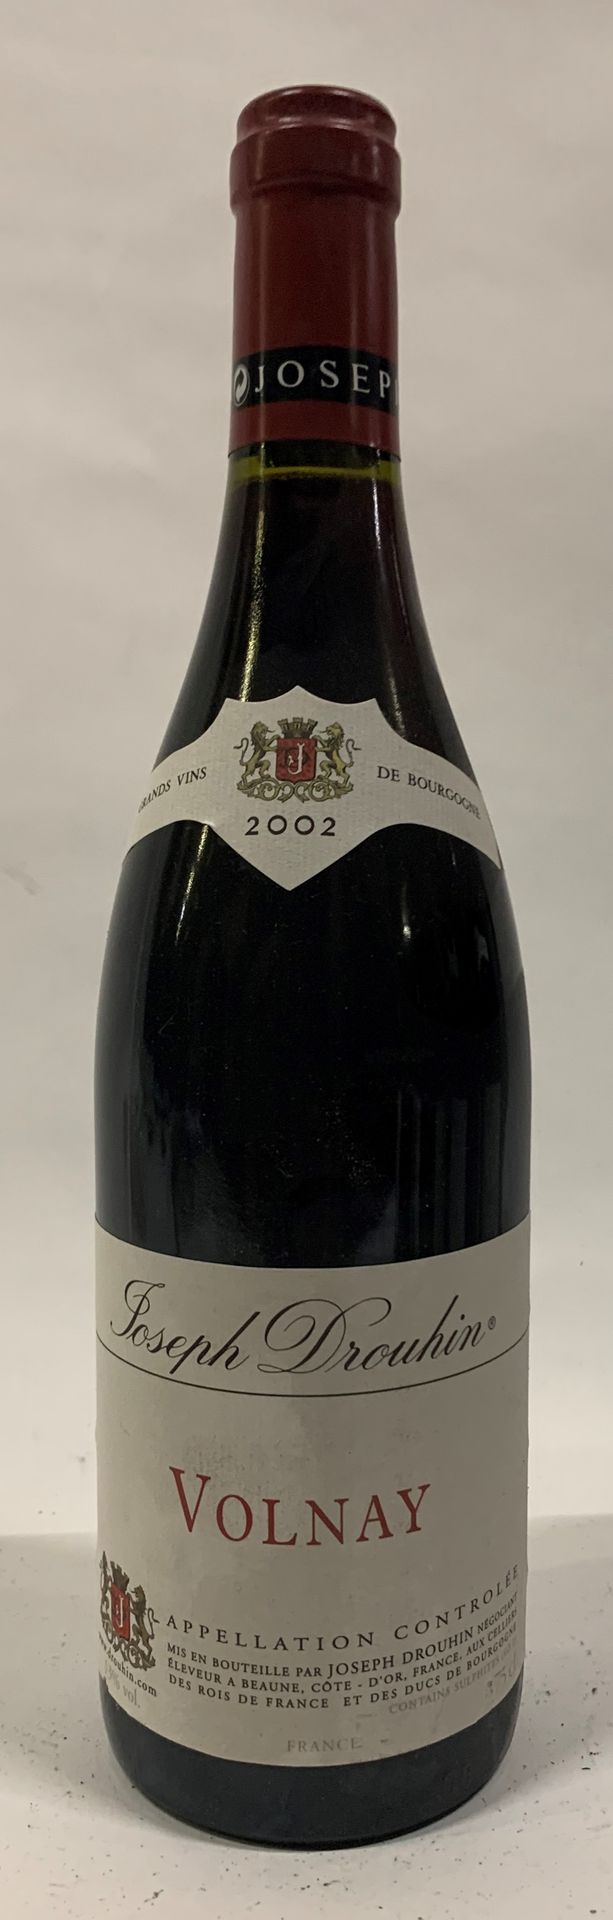 Null ● VOLNAY | Joseph Drouhin, 2002

9 bouteilles

Réf. 48